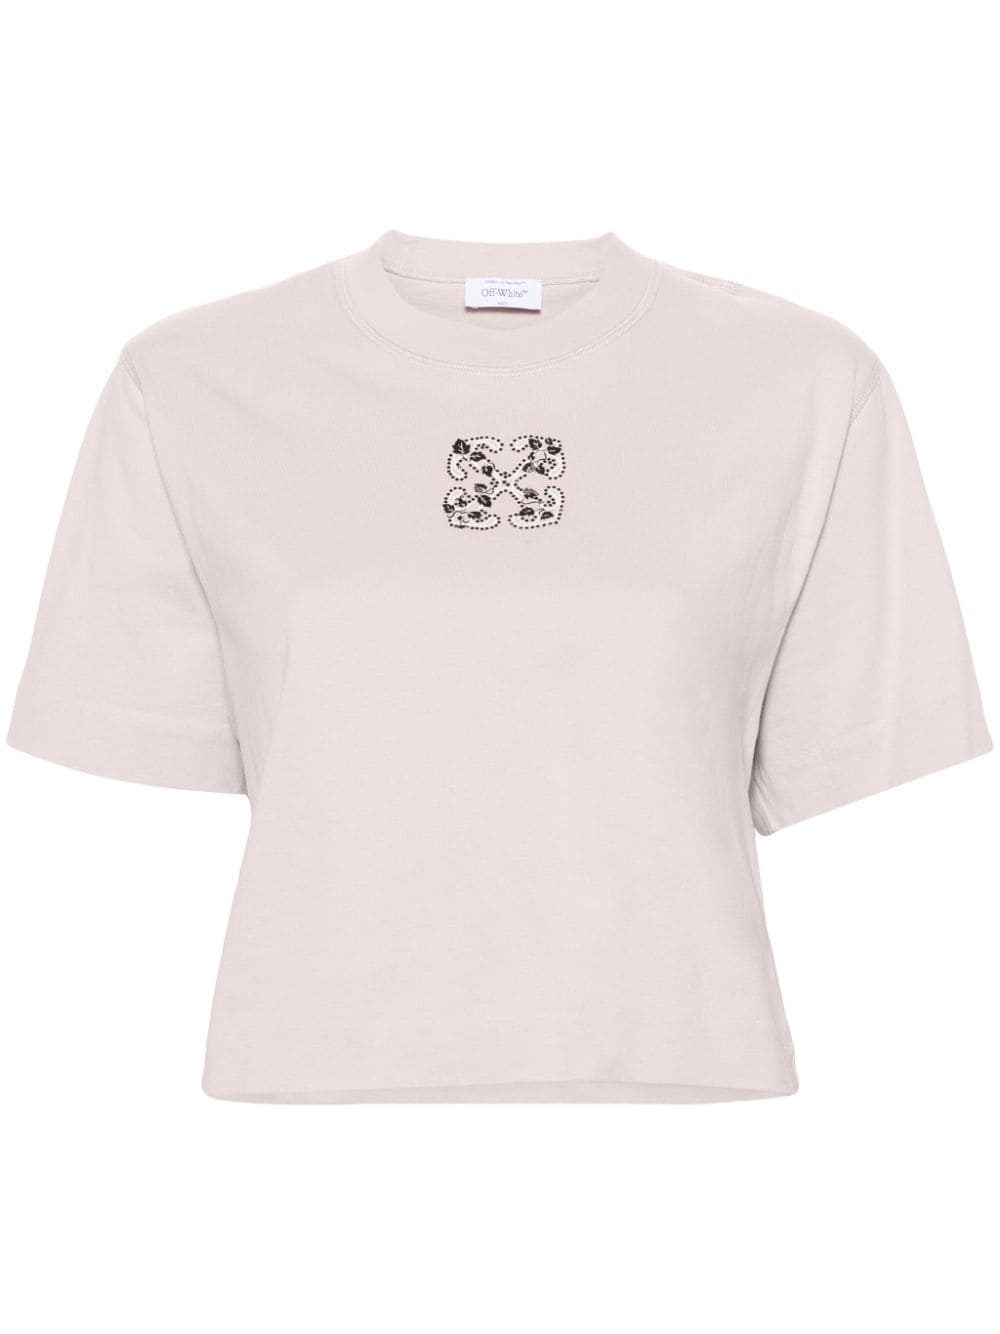 Off-White Bling Leaves Arrow T-shirt - Pink von Off-White